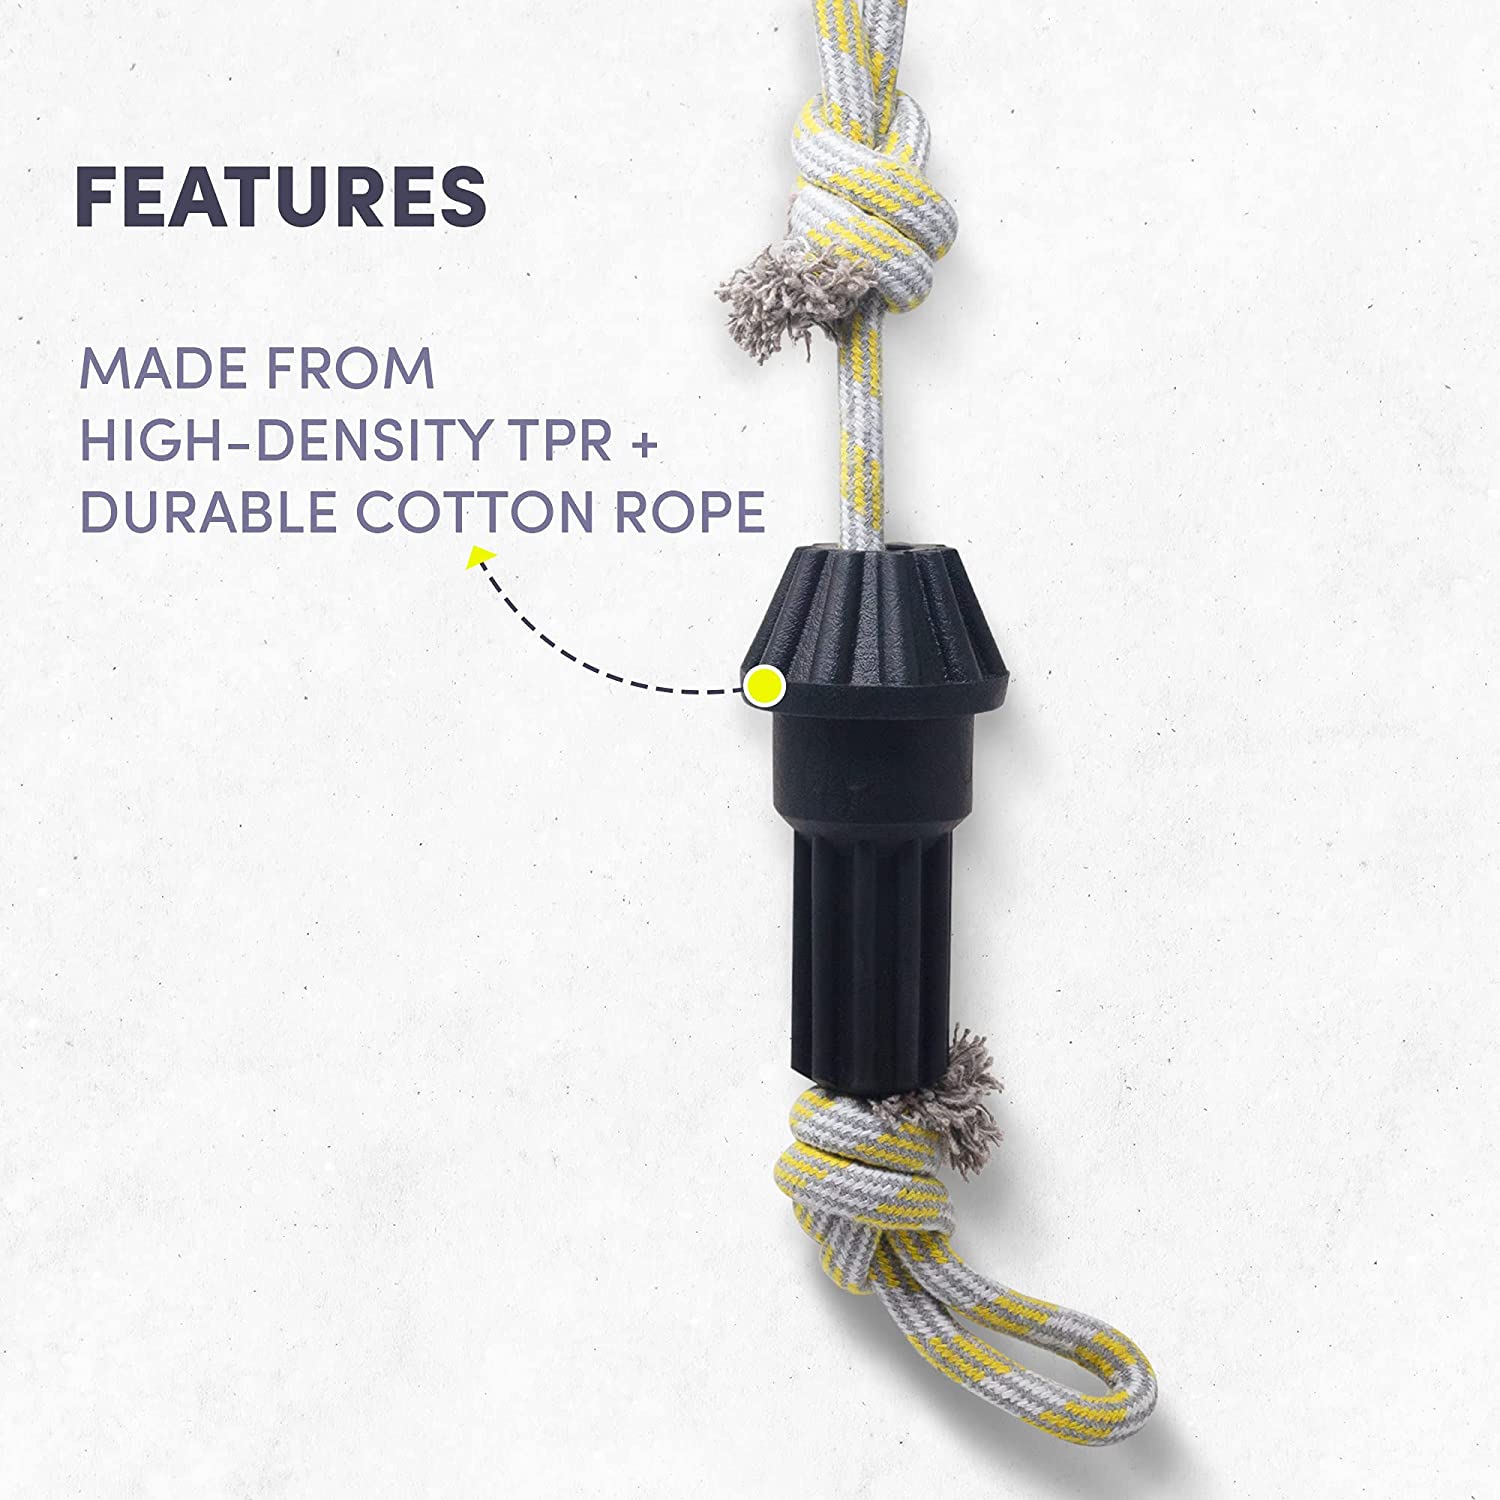 FOFOS Driveshaft Rope Toy